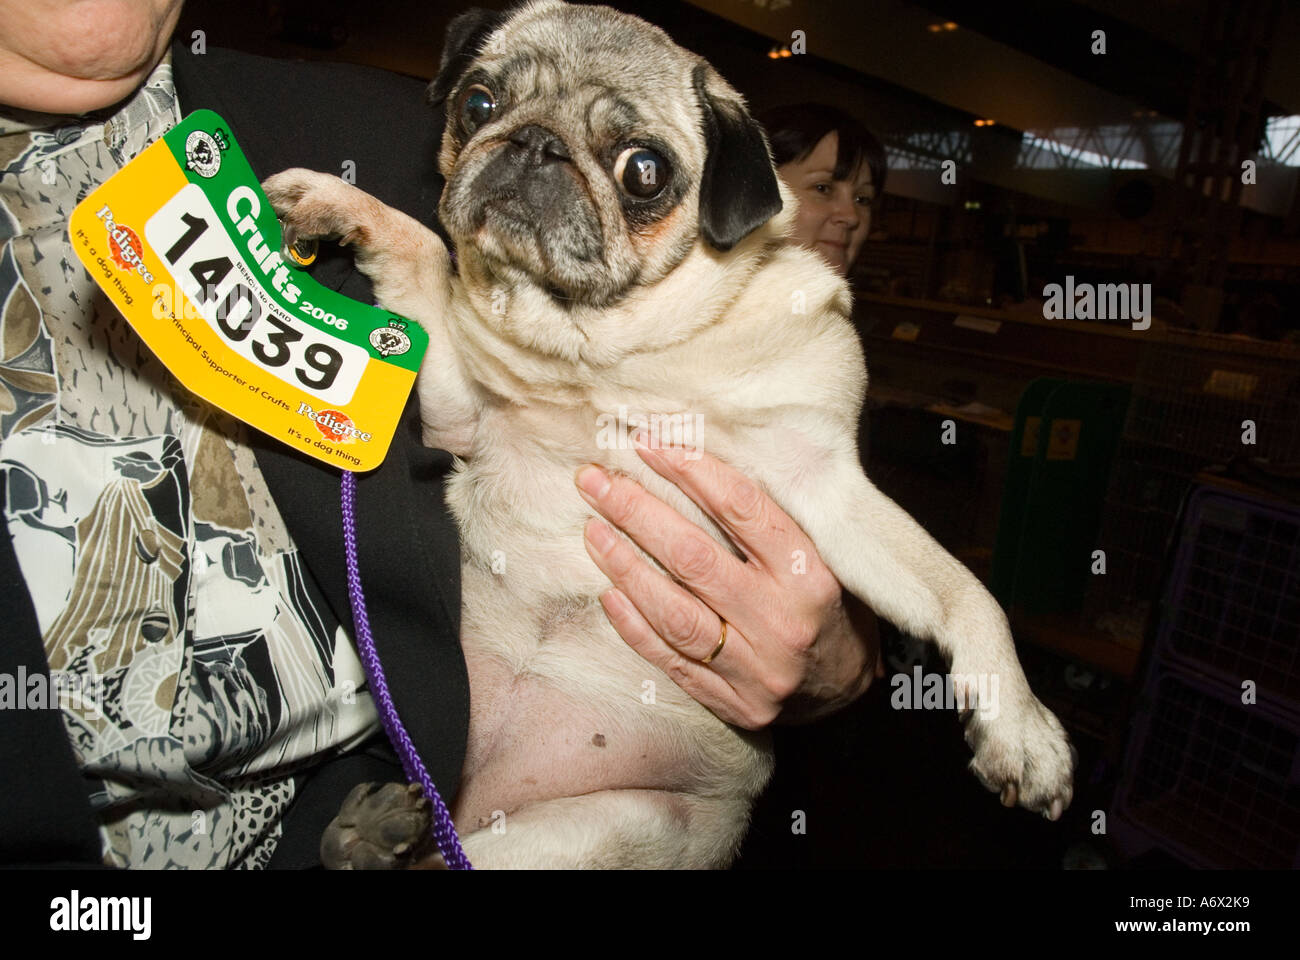 A Pug being carried to a competition ring at Crufts dog show Stock Photo